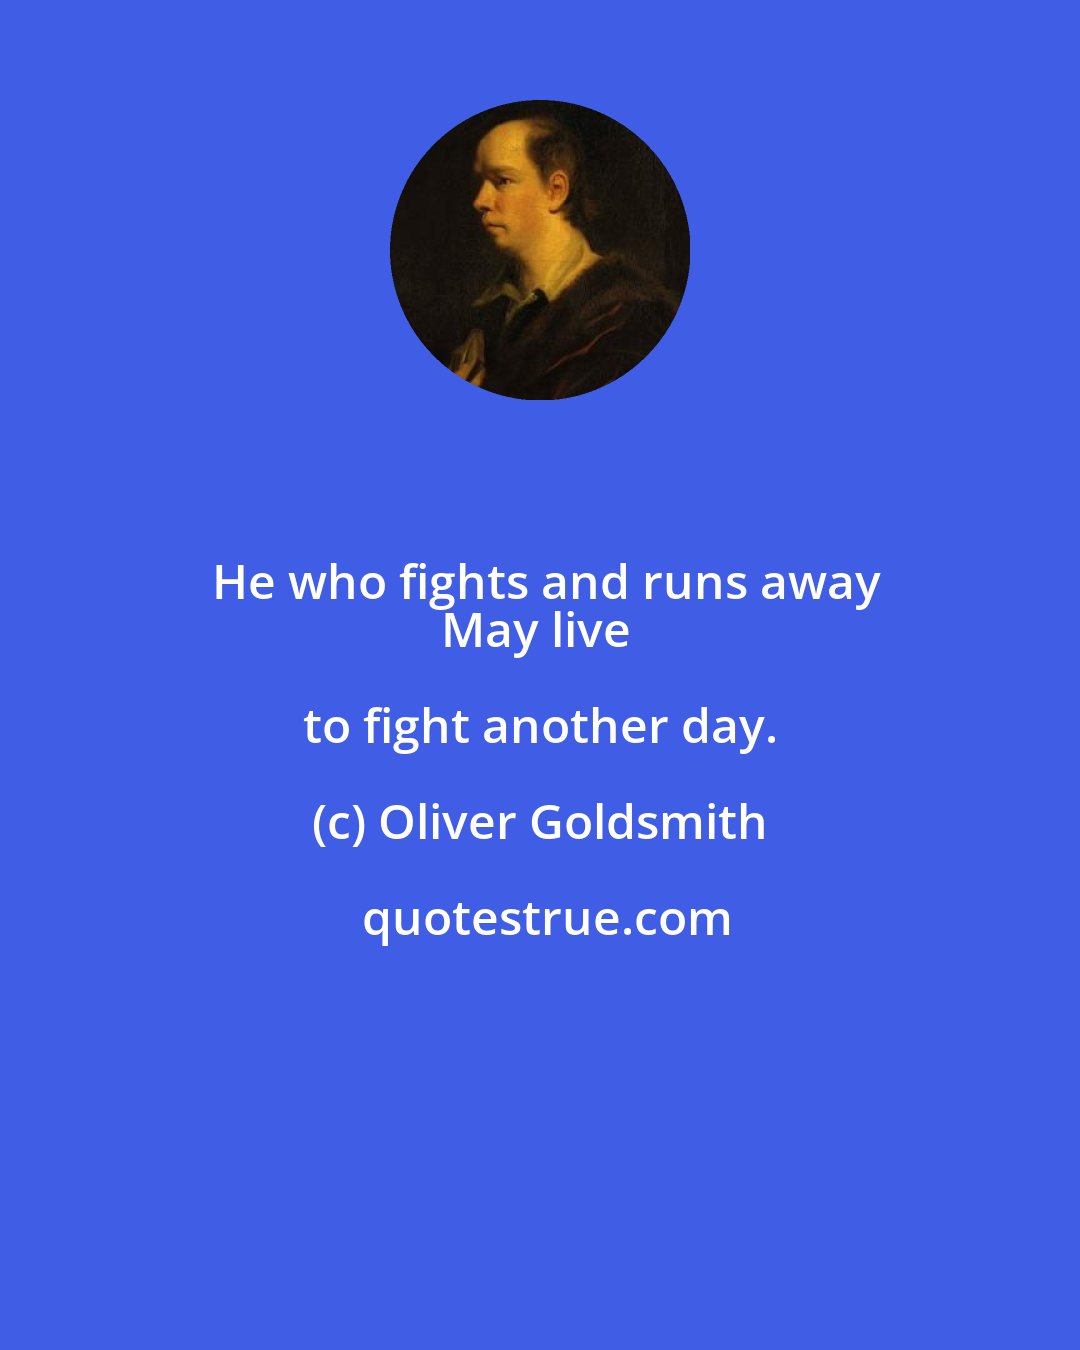 Oliver Goldsmith: He who fights and runs away
May live to fight another day.